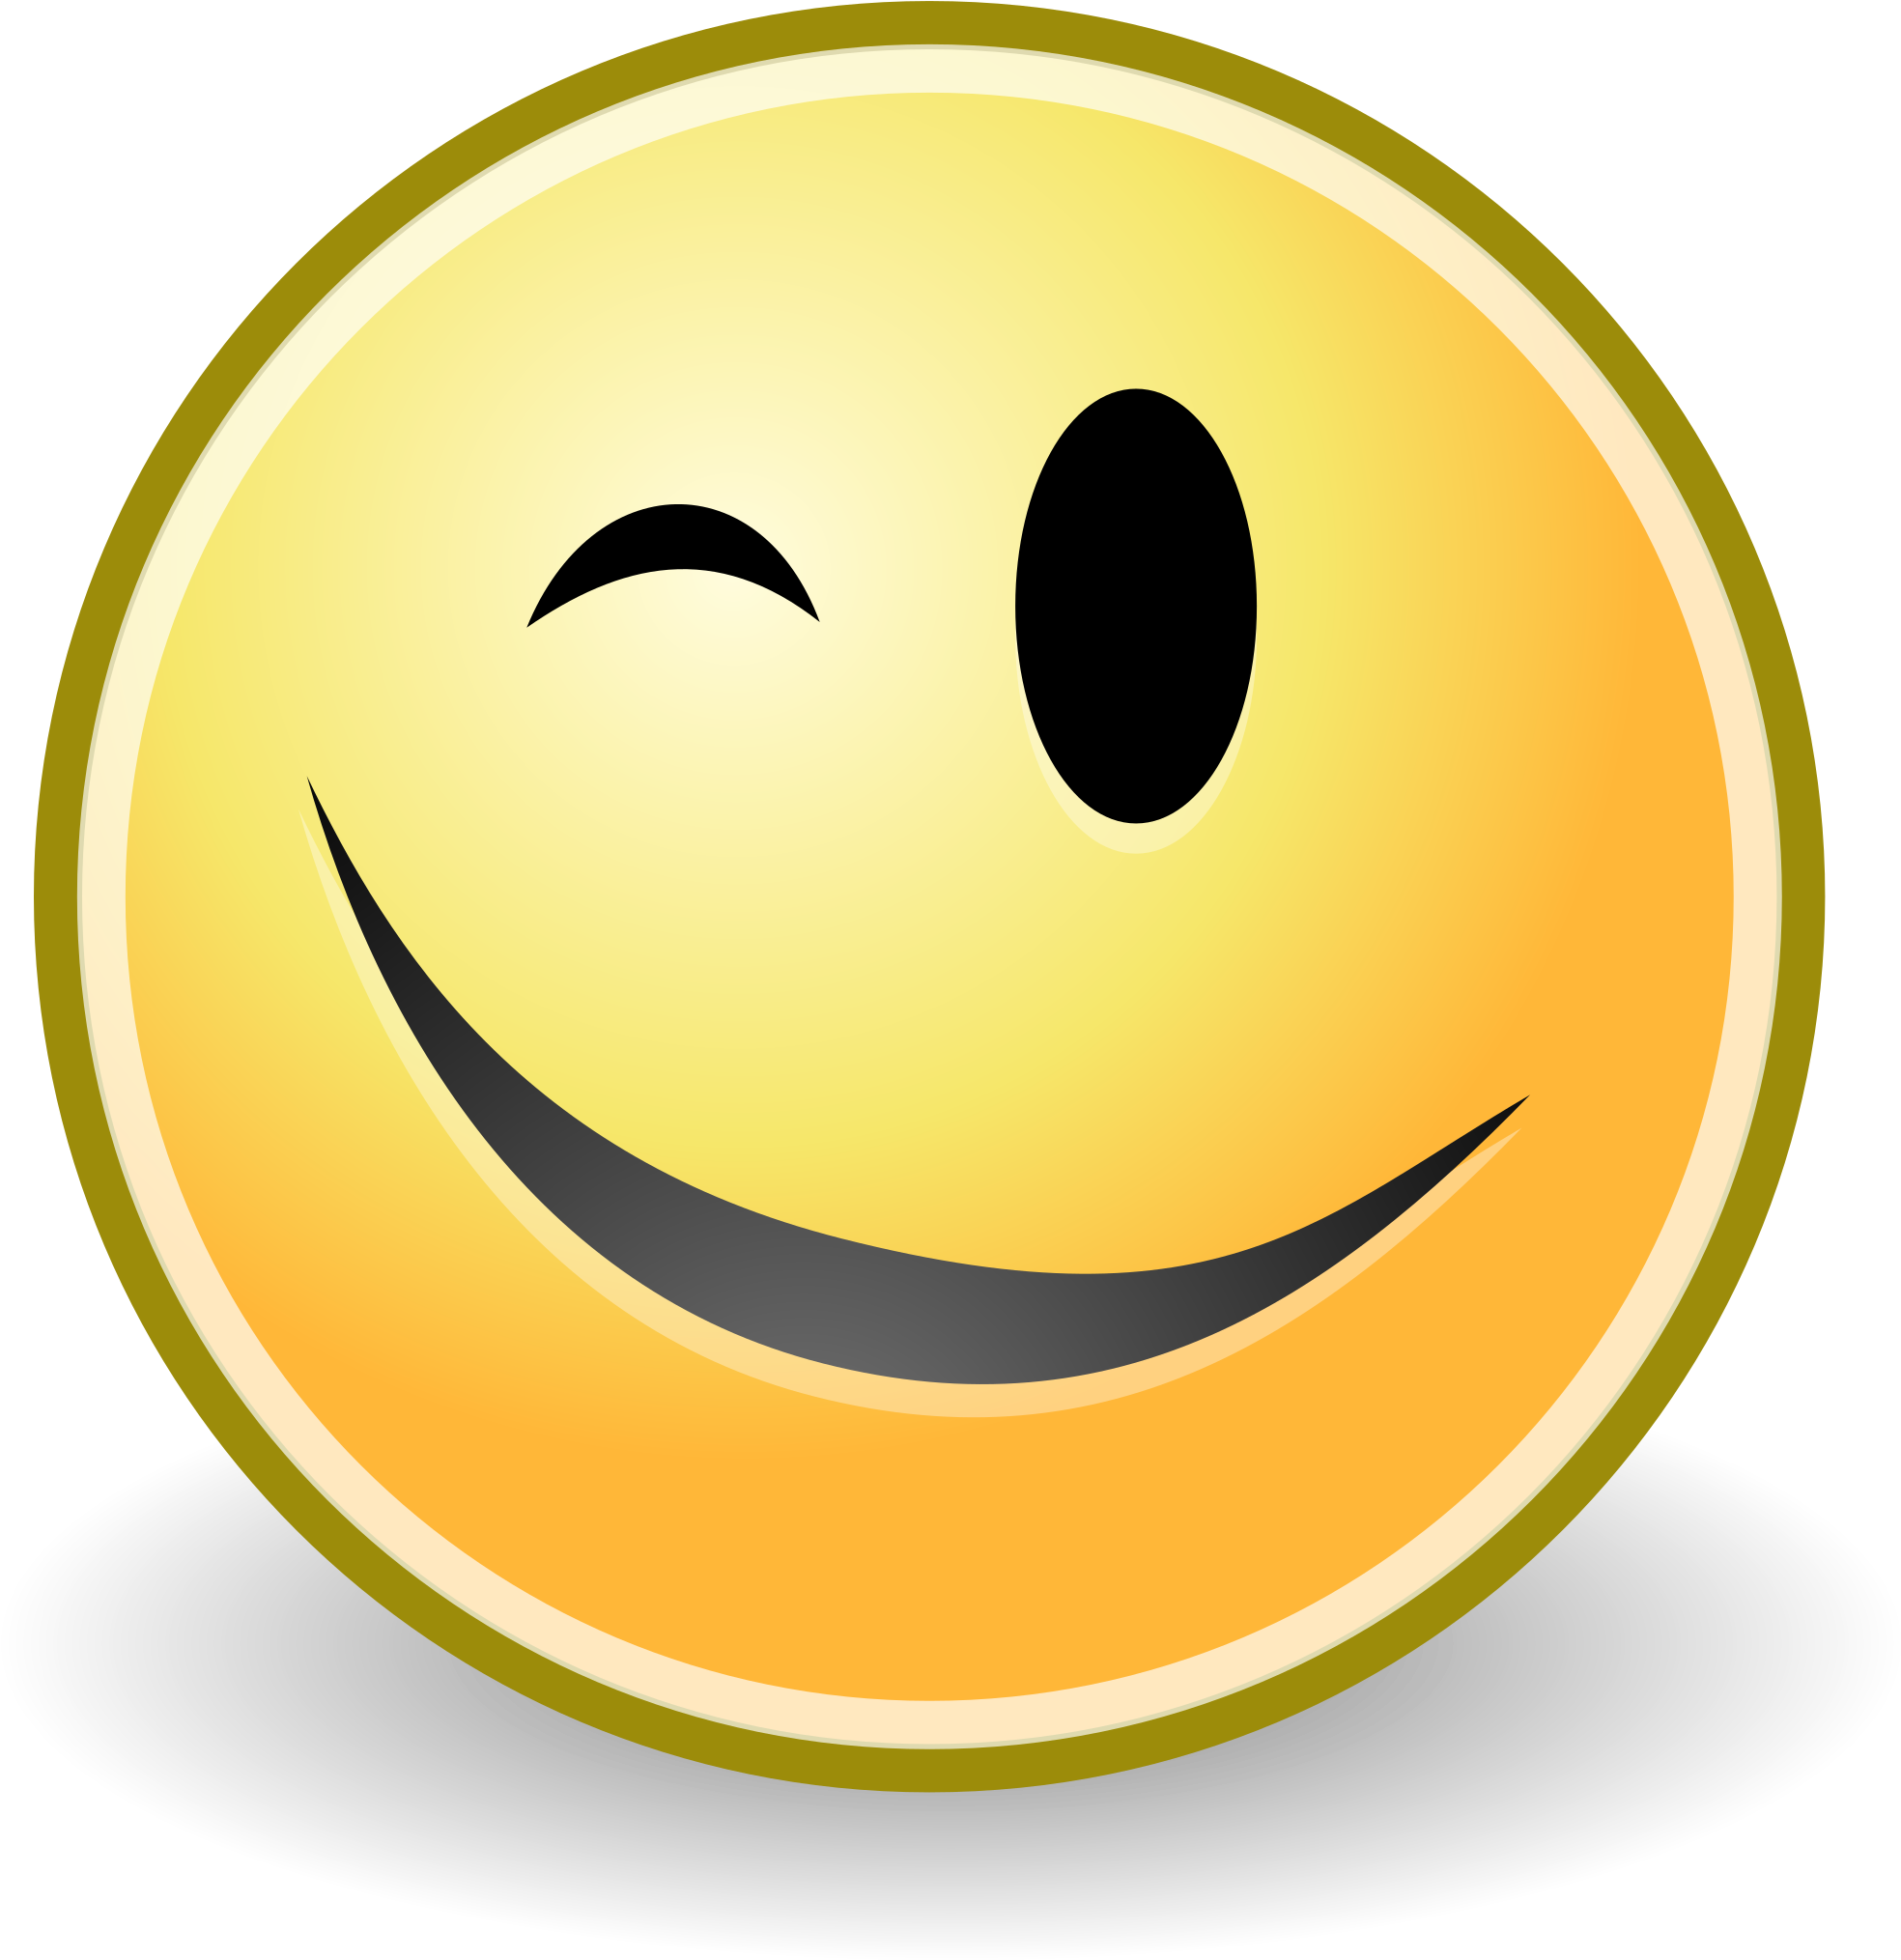 Big Image - Wink And A Smile - (2400x2400) Png Clipart Download. 